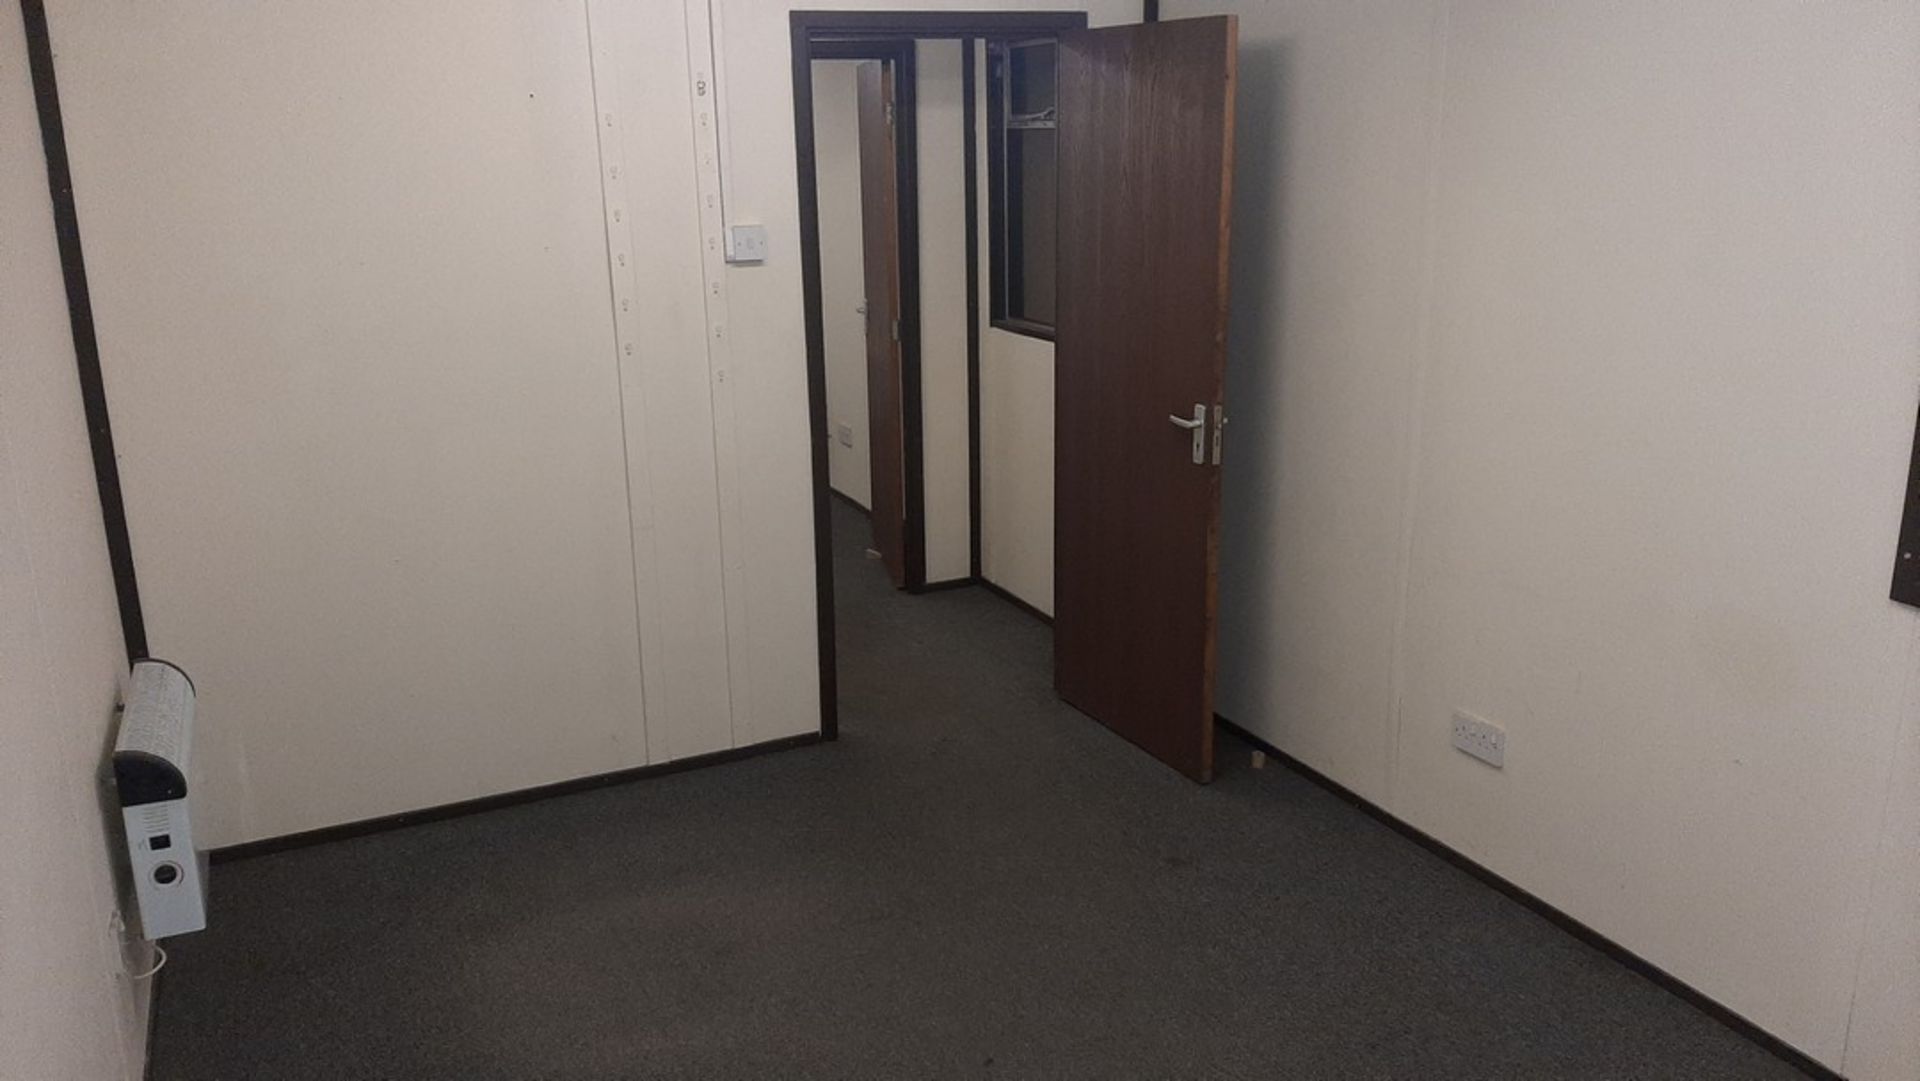 10ft x 32ft jack leg cabin. With two 10ftx 14ft rooms and hall. Used as office inside building. - Image 17 of 25